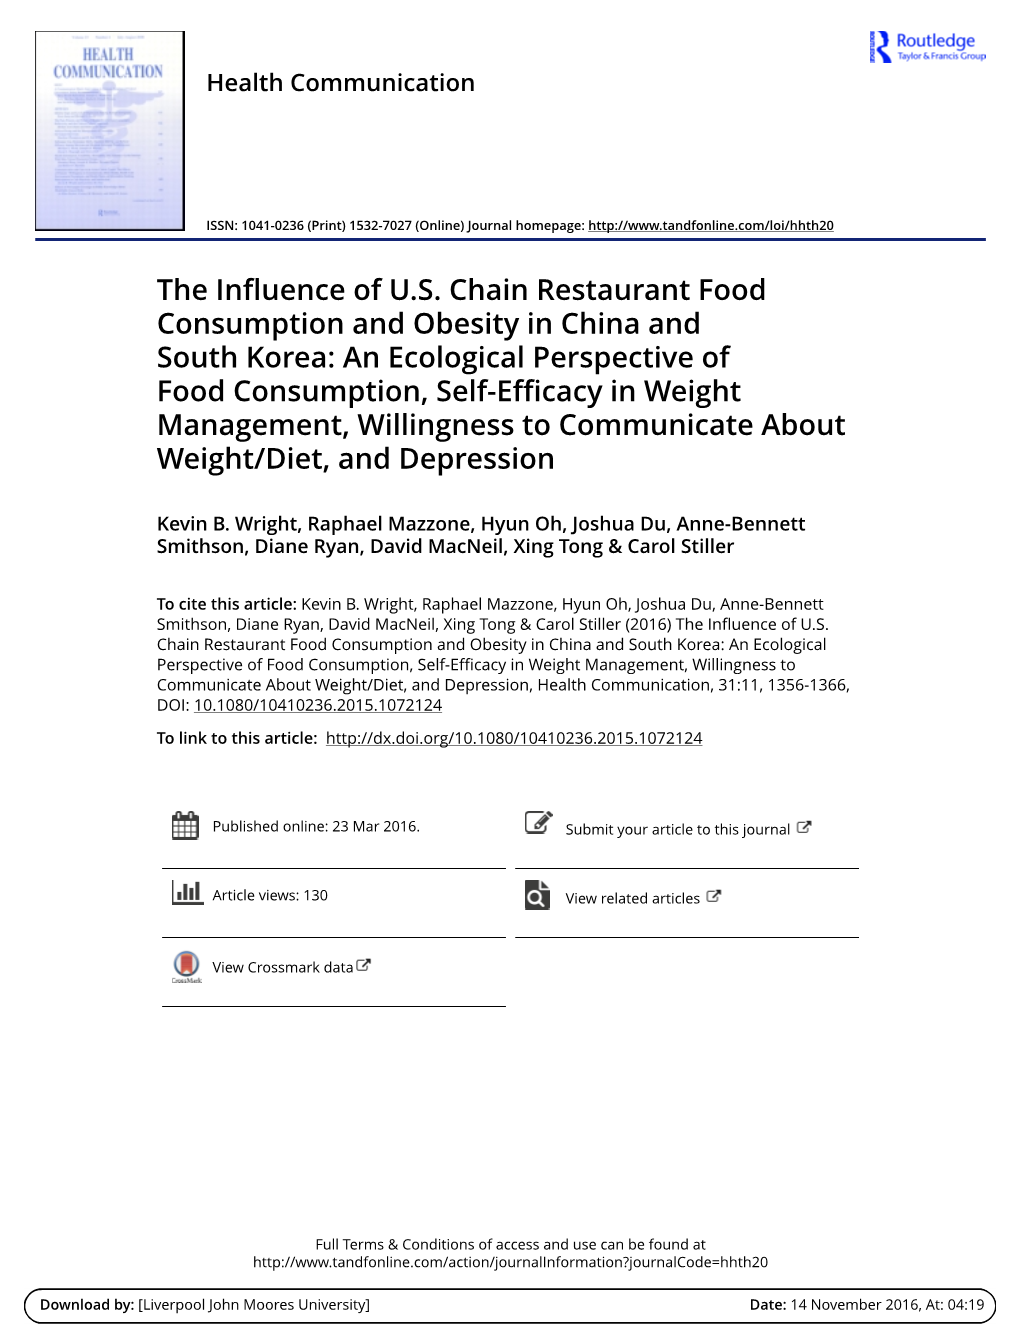 The Influence of U.S. Chain Restaurant Food Consumption and Obesity in China and South Korea: an Ecological Perspective of Food